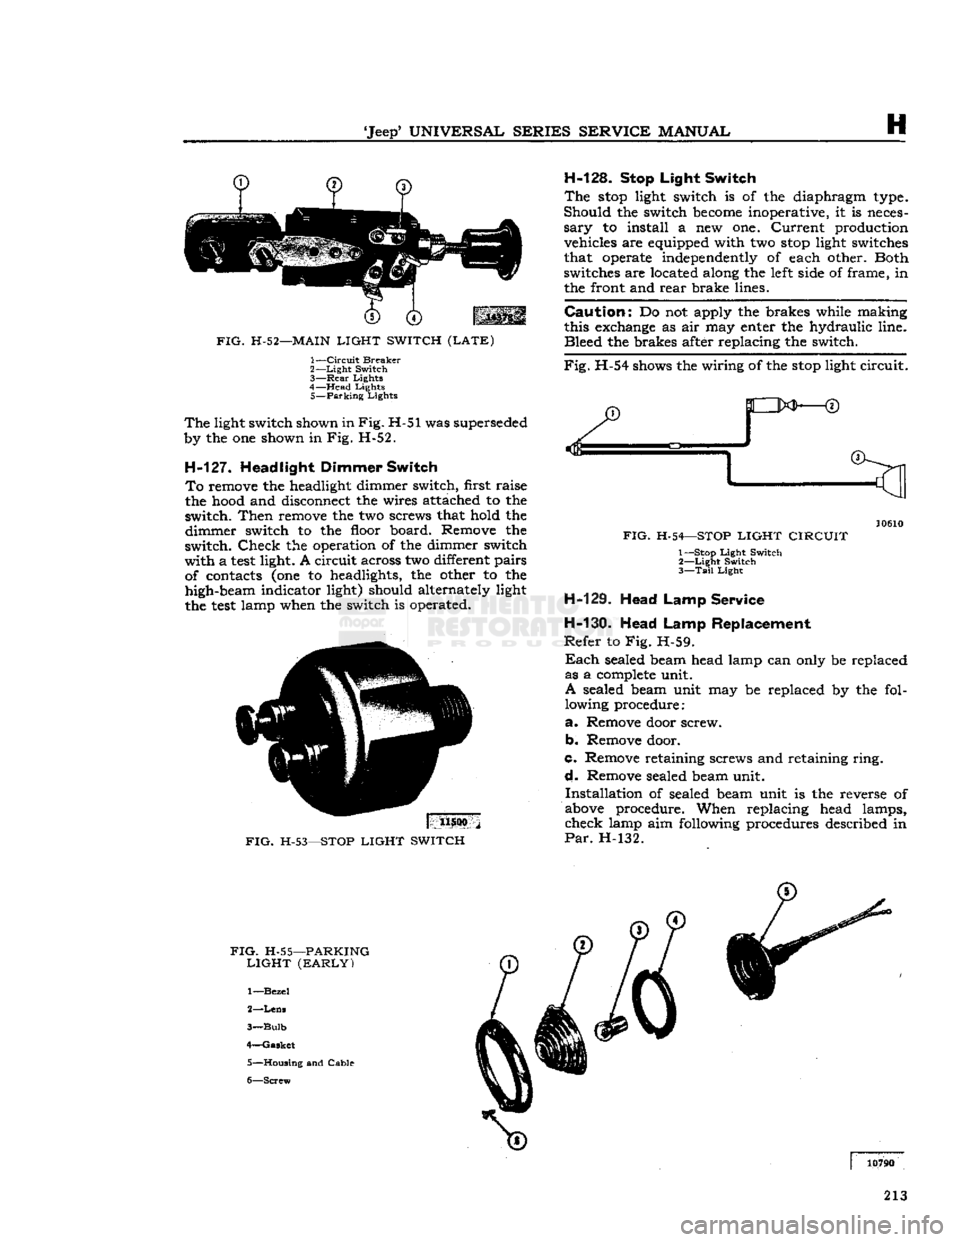 JEEP CJ 1953 Owners Manual 
Jeep
 UNIVERSAL
 SERIES SERVICE
 MANUAL 
H 

FIG.
 H-52—MAIN
 LIGHT SWITCH (LATE) 
 1—
 Circuit
 Breaker 

2—
 Light
 Switch 

3—
 Rear
 Lights 

4—
 Head
 Lights 
 5—
 Parking
 Lights 